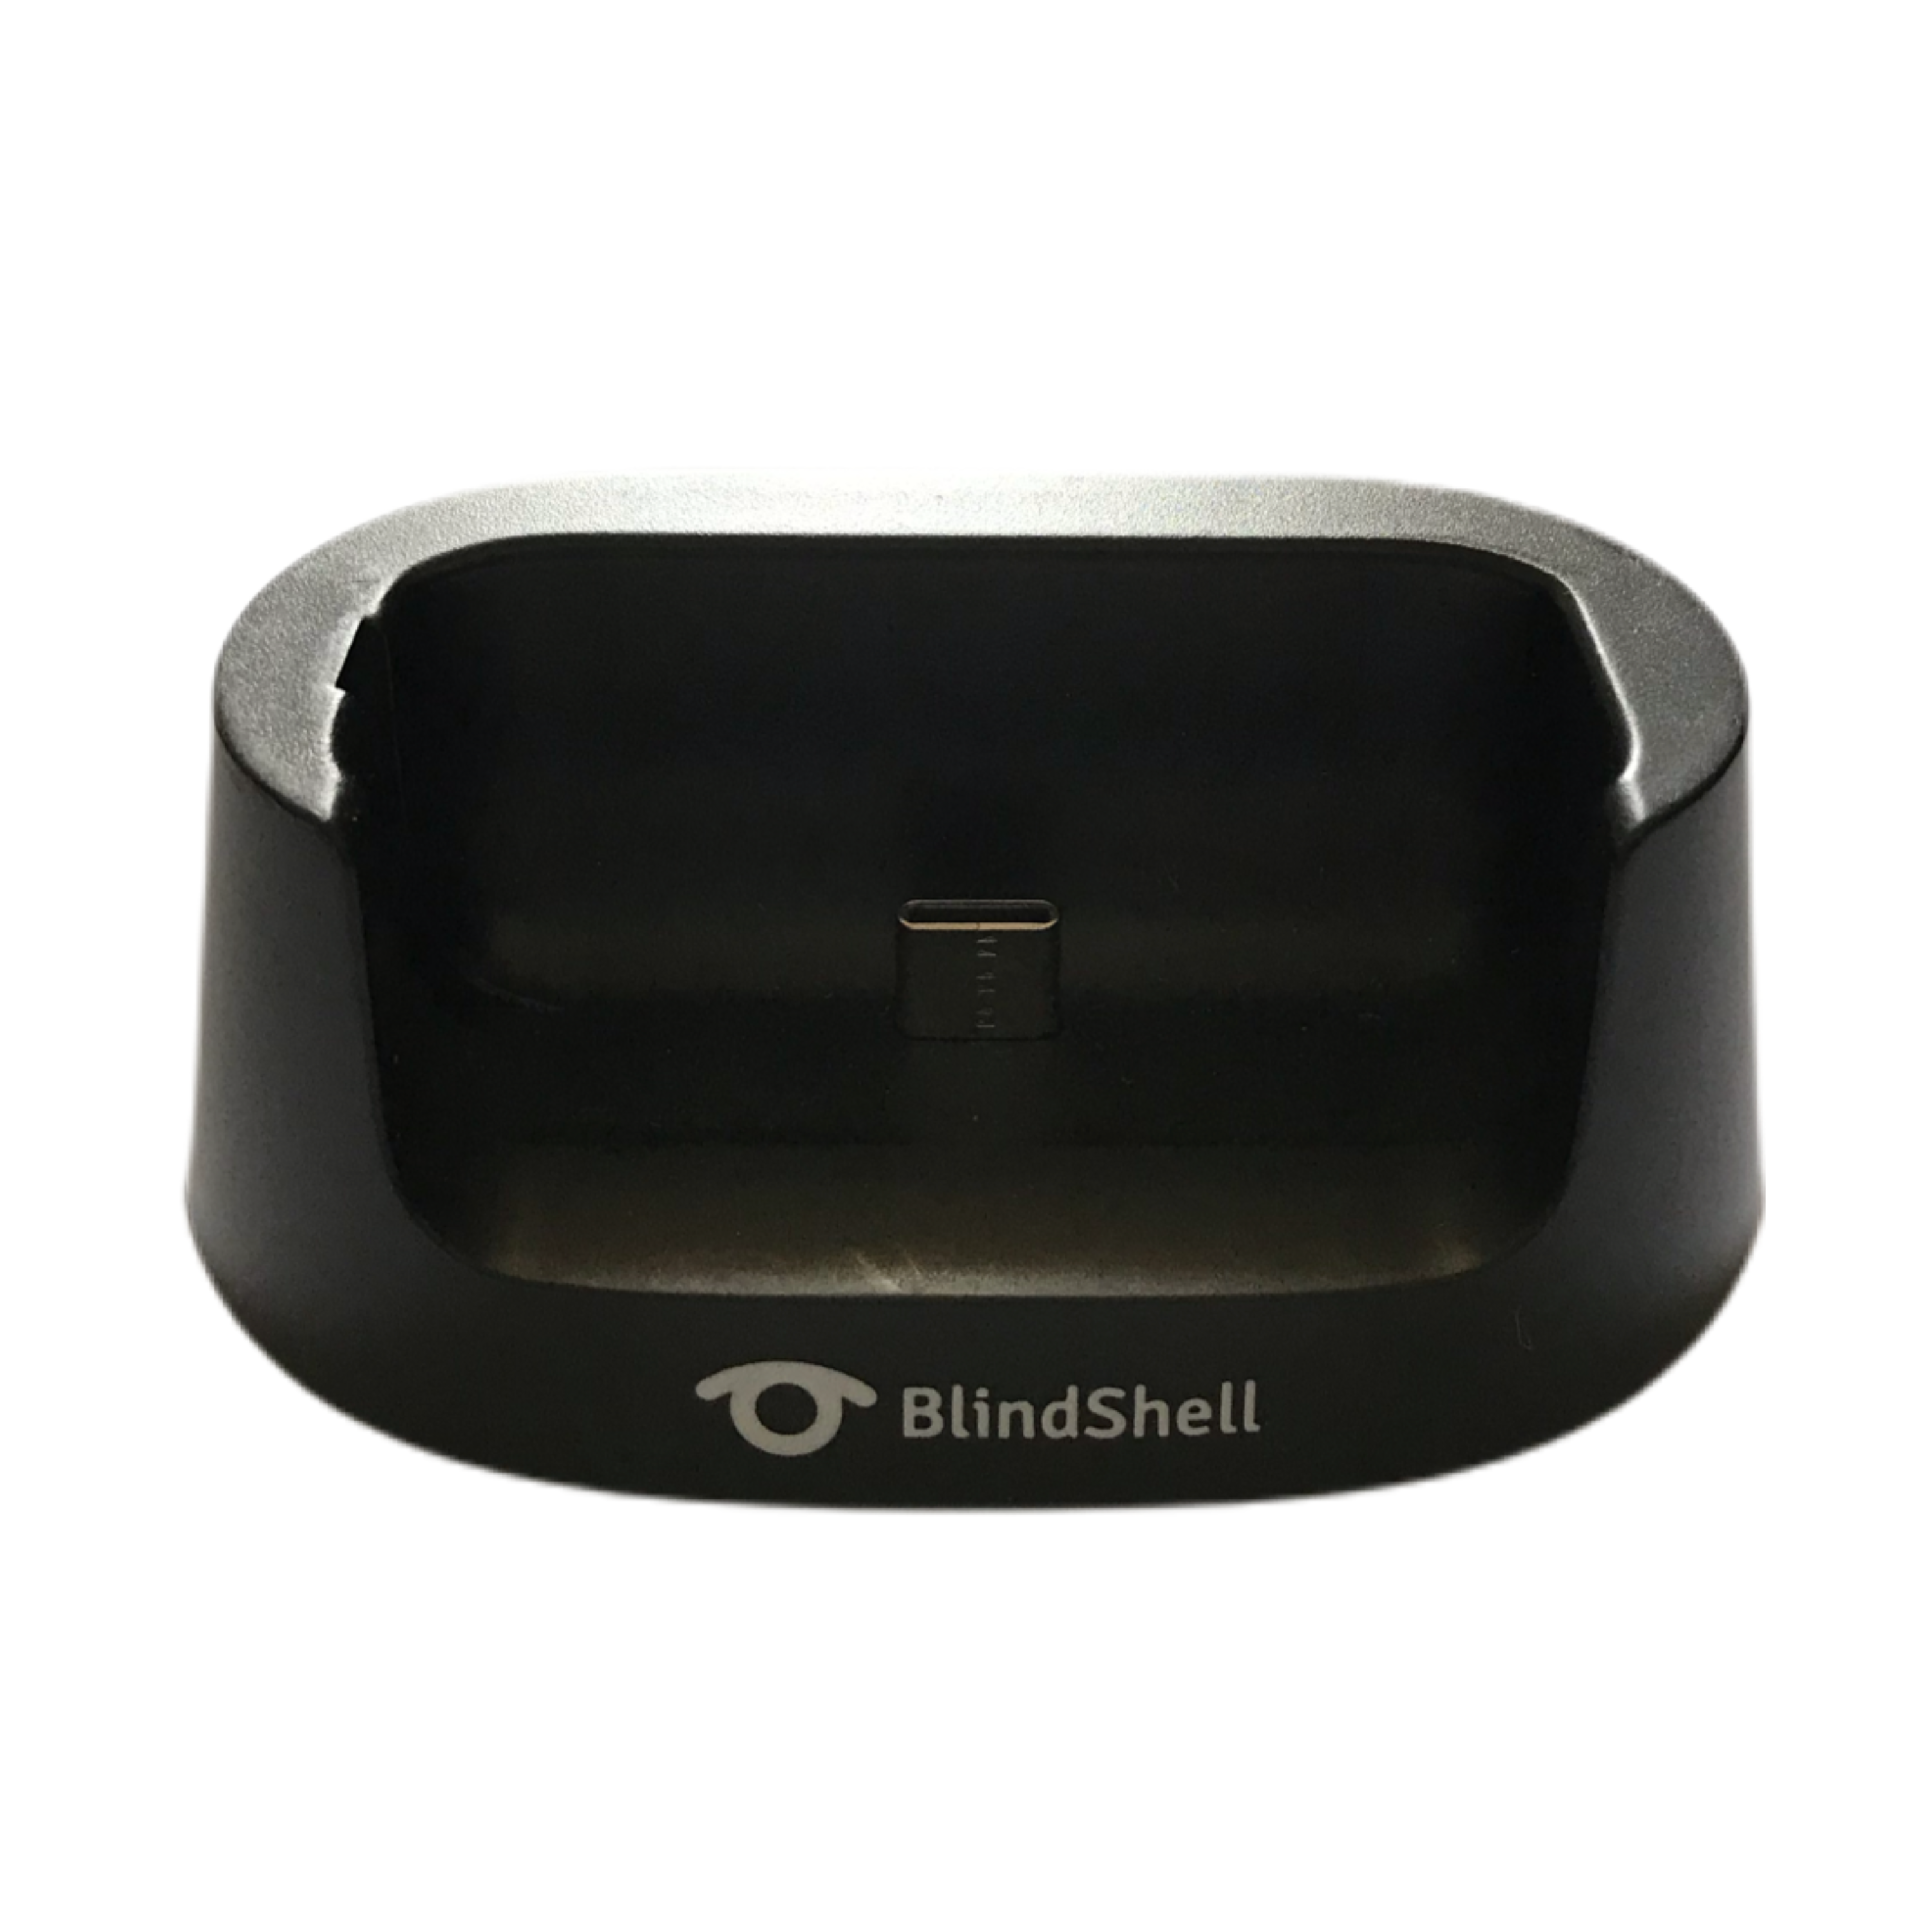 BlindShell Classic 2 replacement charging cradle